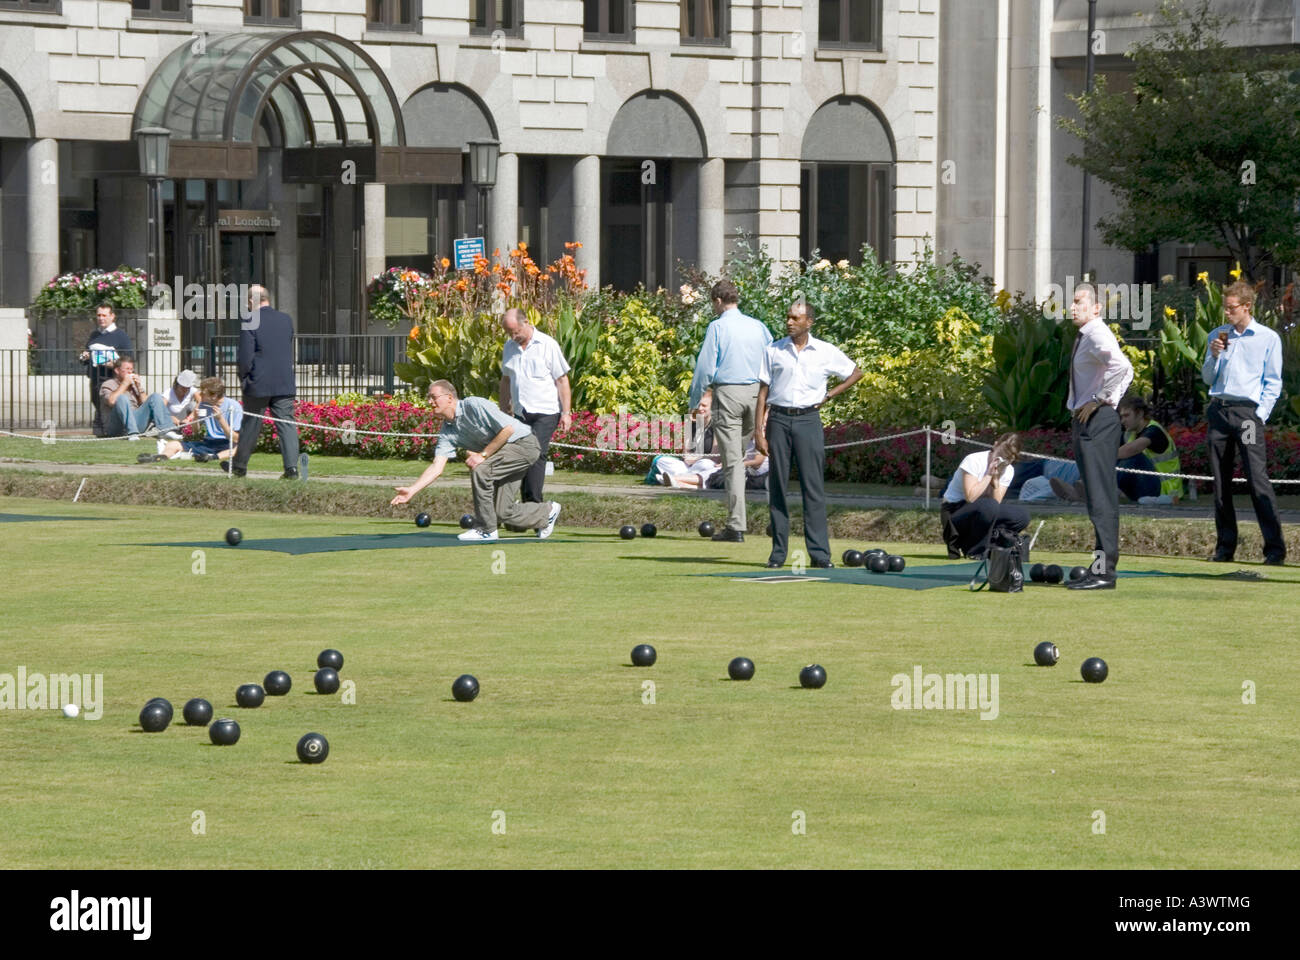 Lunchtime game of bowls on bowling green watched by office workers on a hot summers day Finsbury Square London England UK Stock Photo